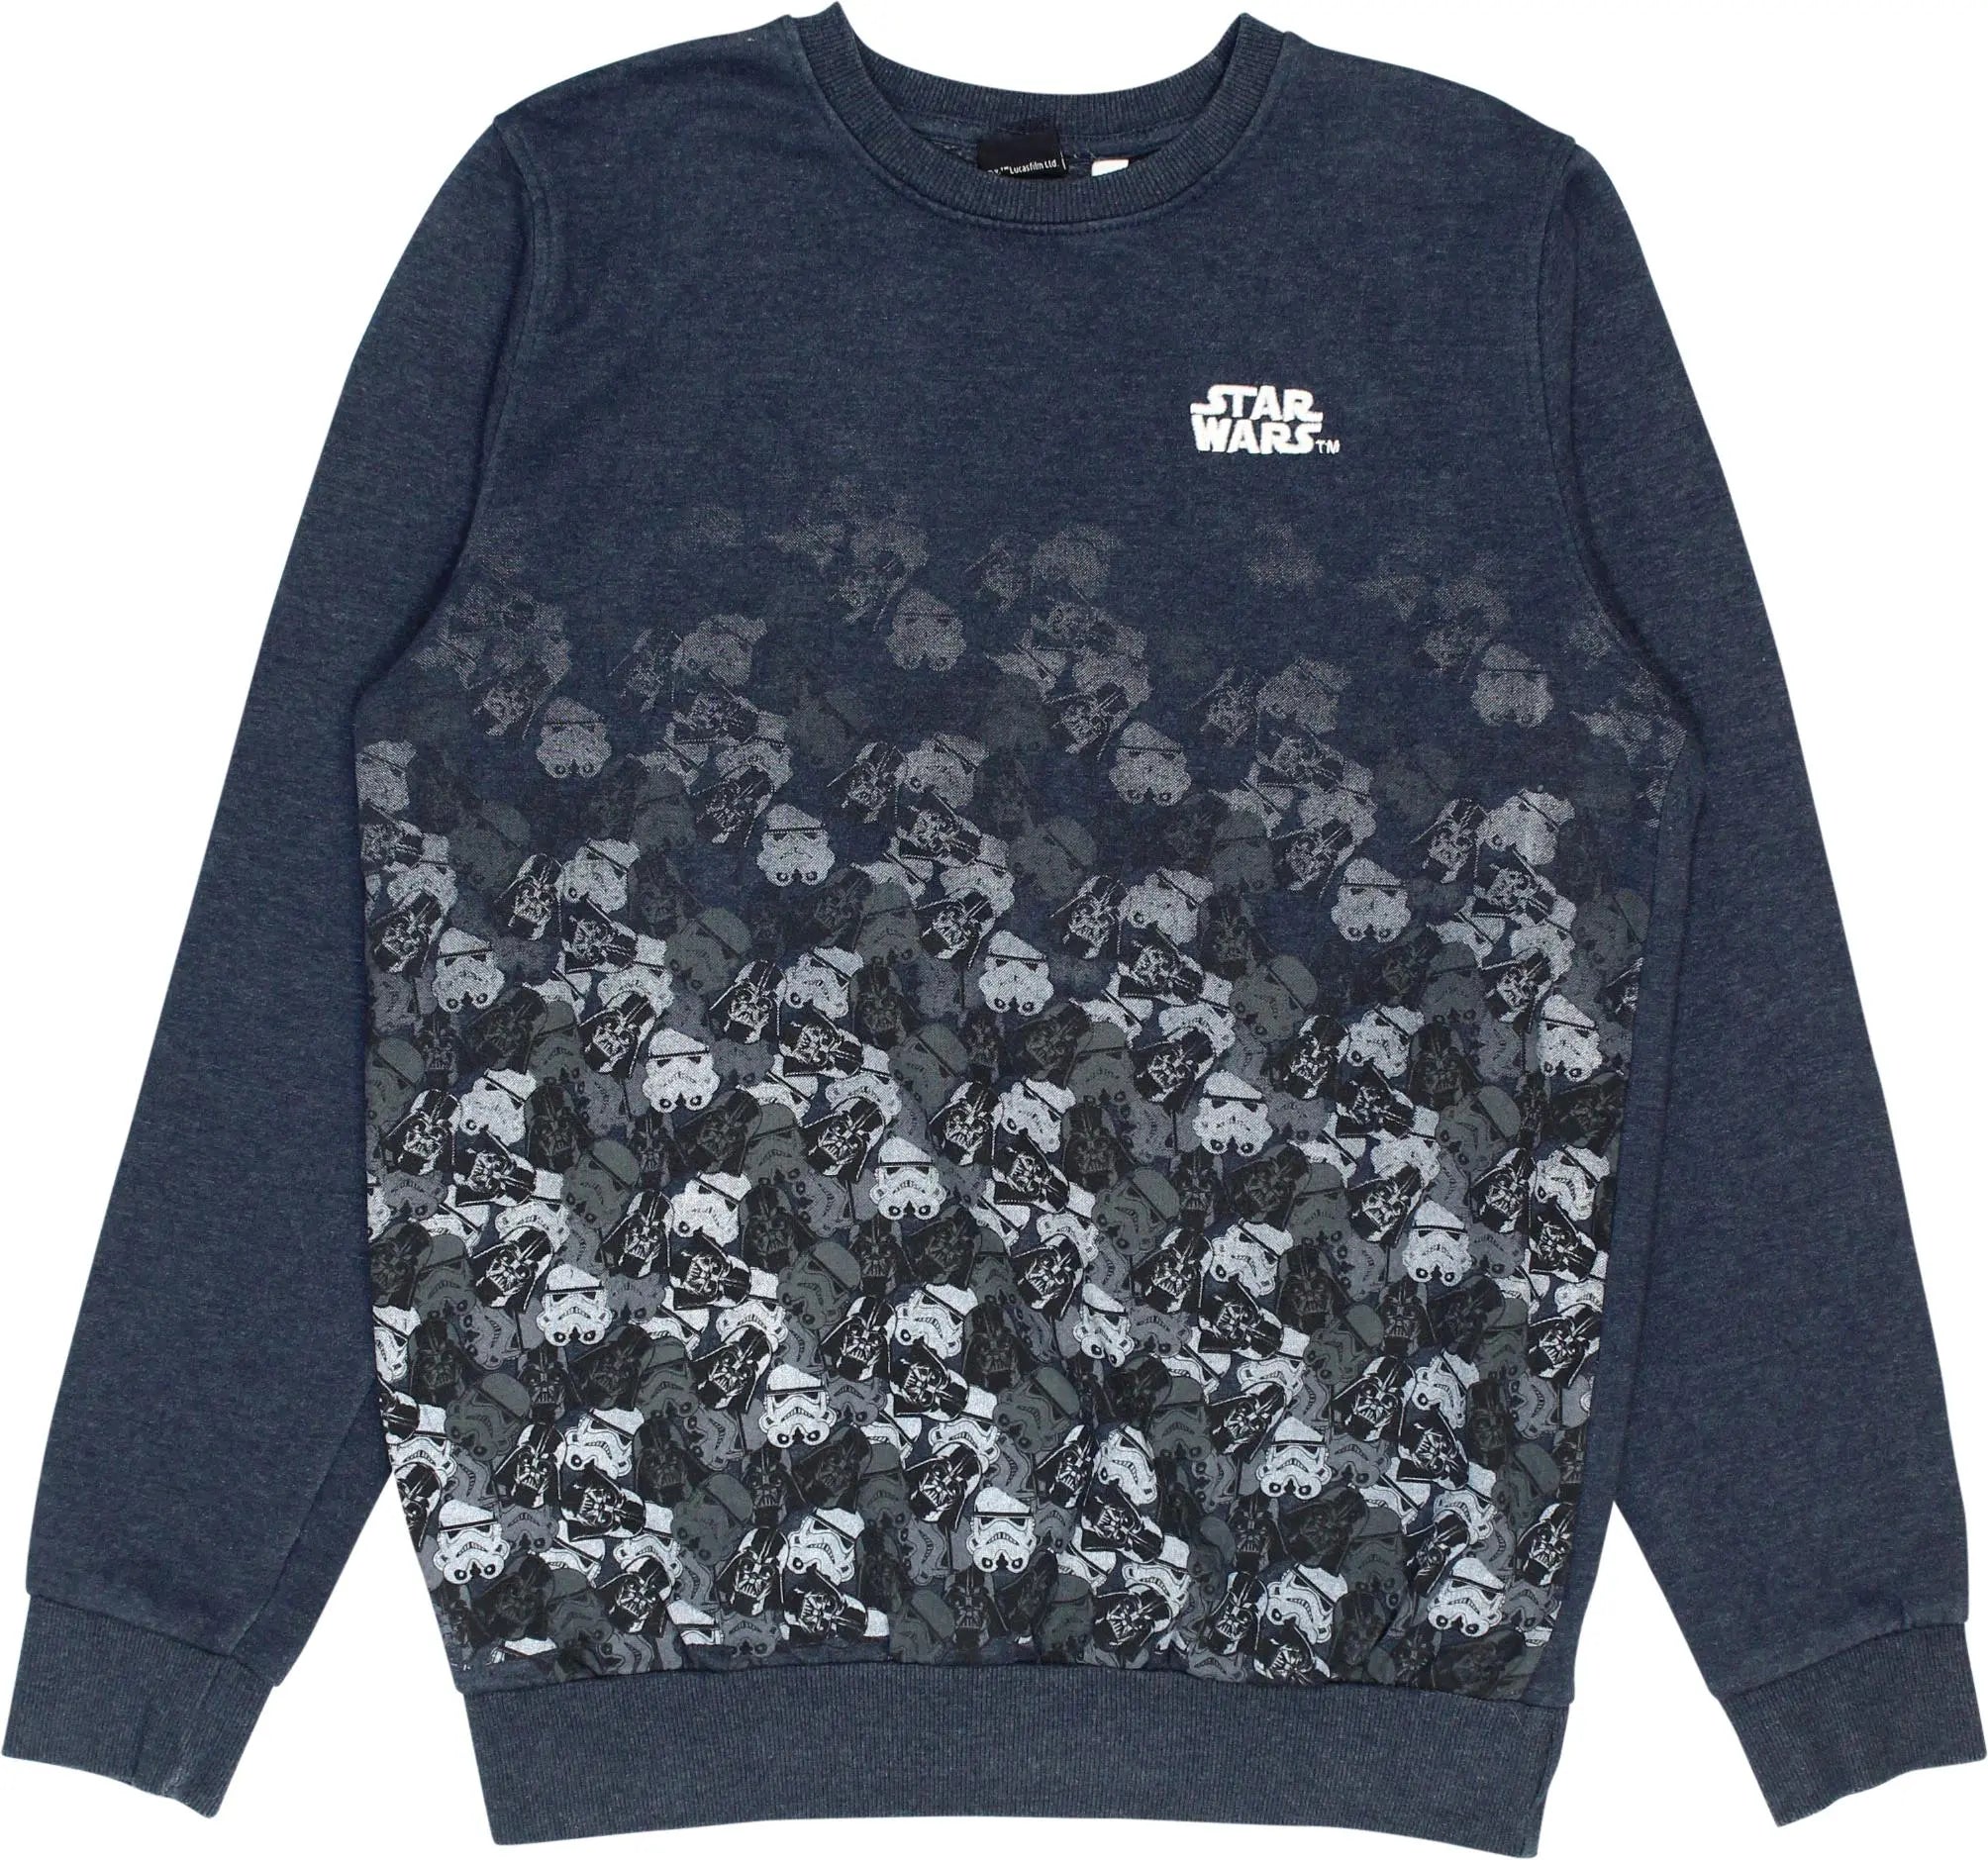 C&A - Star Wars Sweater- ThriftTale.com - Vintage and second handclothing